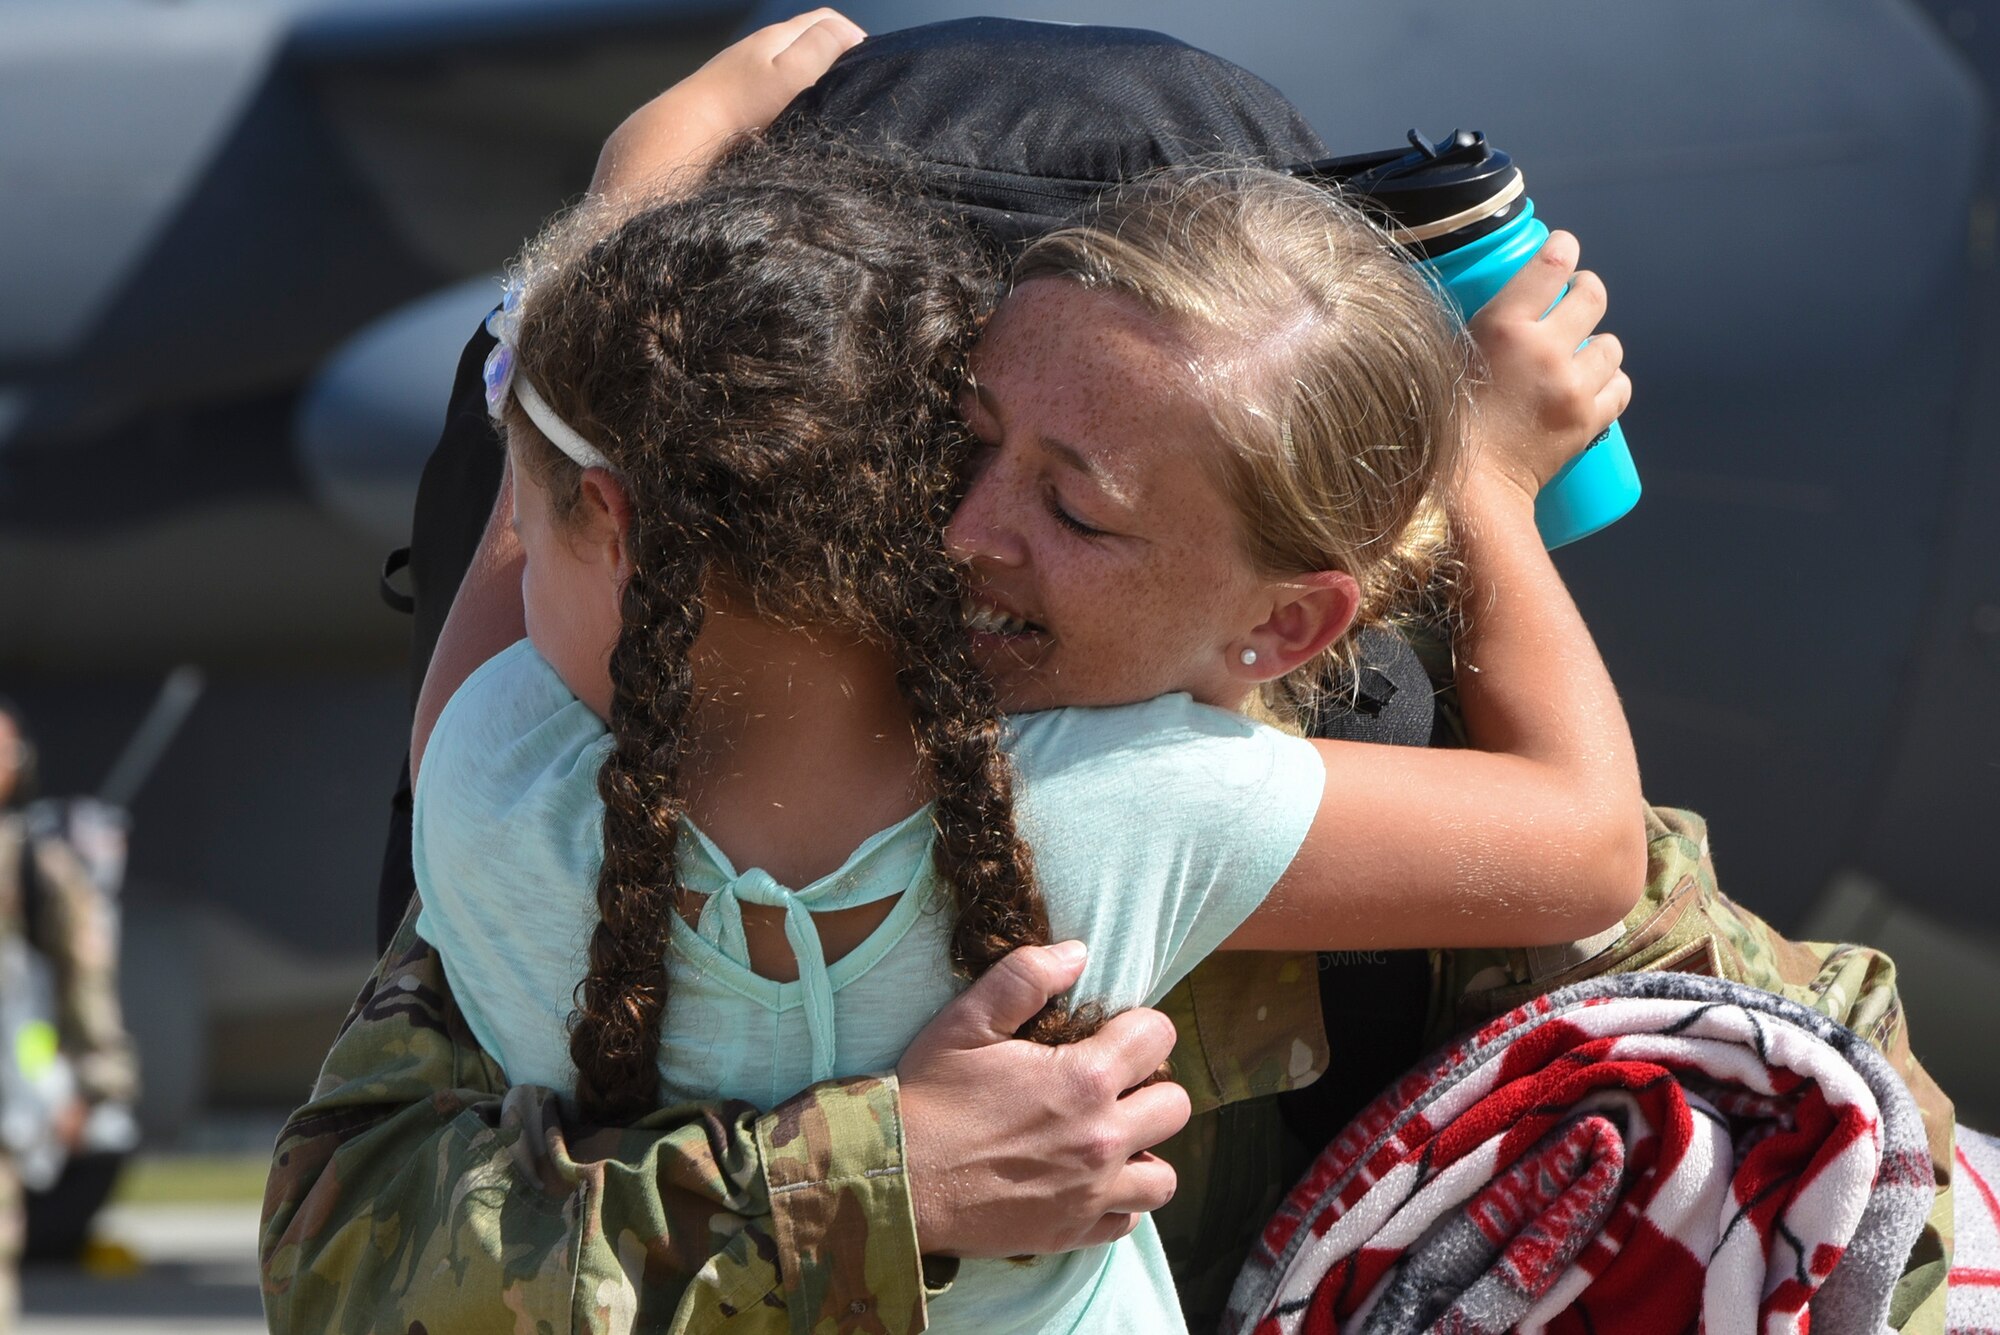 Master Sgt. Danielle Bruce-Salmon, 71st Rescue Squadron (RQS) special aviation resource management superintendent, hugs her daughter, Brooklyn, during a redeployment, Oct. 6, 2017, at Moody Air Force Base, Ga. Airmen from the 71st RQS supported deployed operations by providing expeditionary personnel with on-call recovery forces should they need to be rescued. (U.S. Air Force photo by Senior Airman Greg Nash)